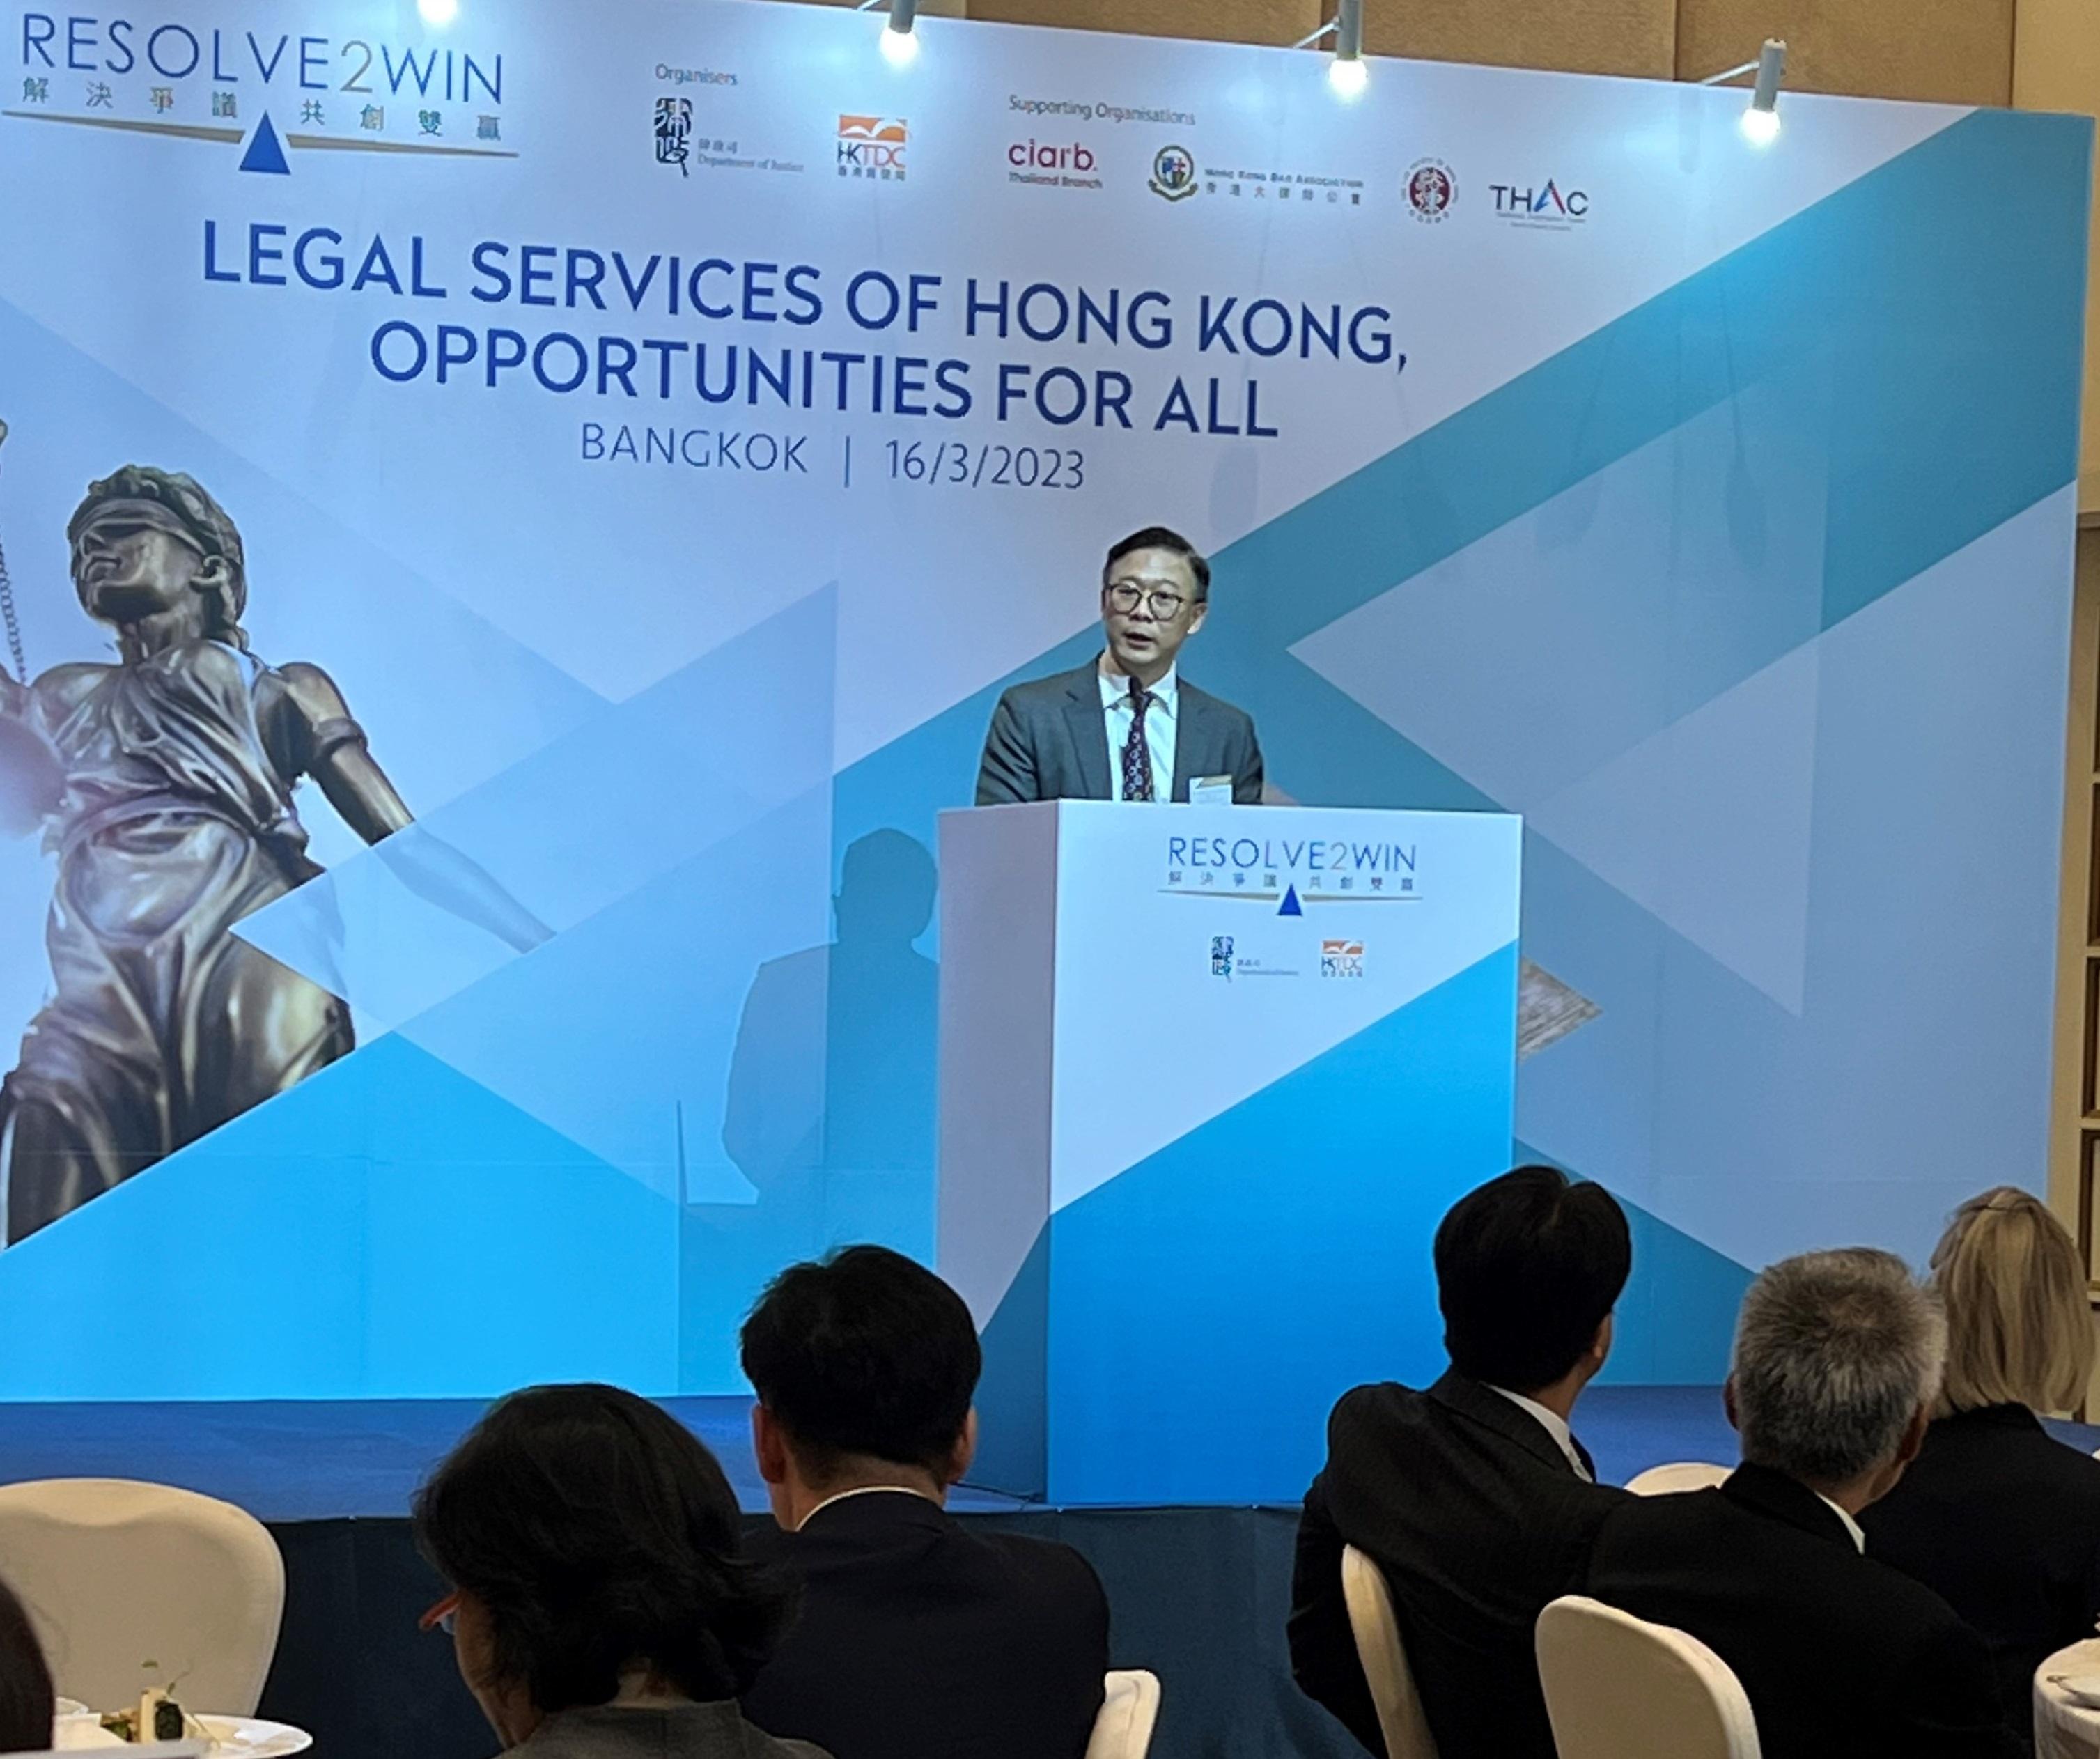 The Deputy Secretary for Justice, Mr Cheung Kwok-kwan, attended the "Resolve2Win - Legal Services of Hong Kong, Opportunities for All", an international promotional campaign co-organised by the Department of Justice and the Hong Kong Trade Development Council, in Bangkok, Thailand, today (March 16). Photo shows Mr Cheung delivering his keynote speech at the event's luncheon.
 

